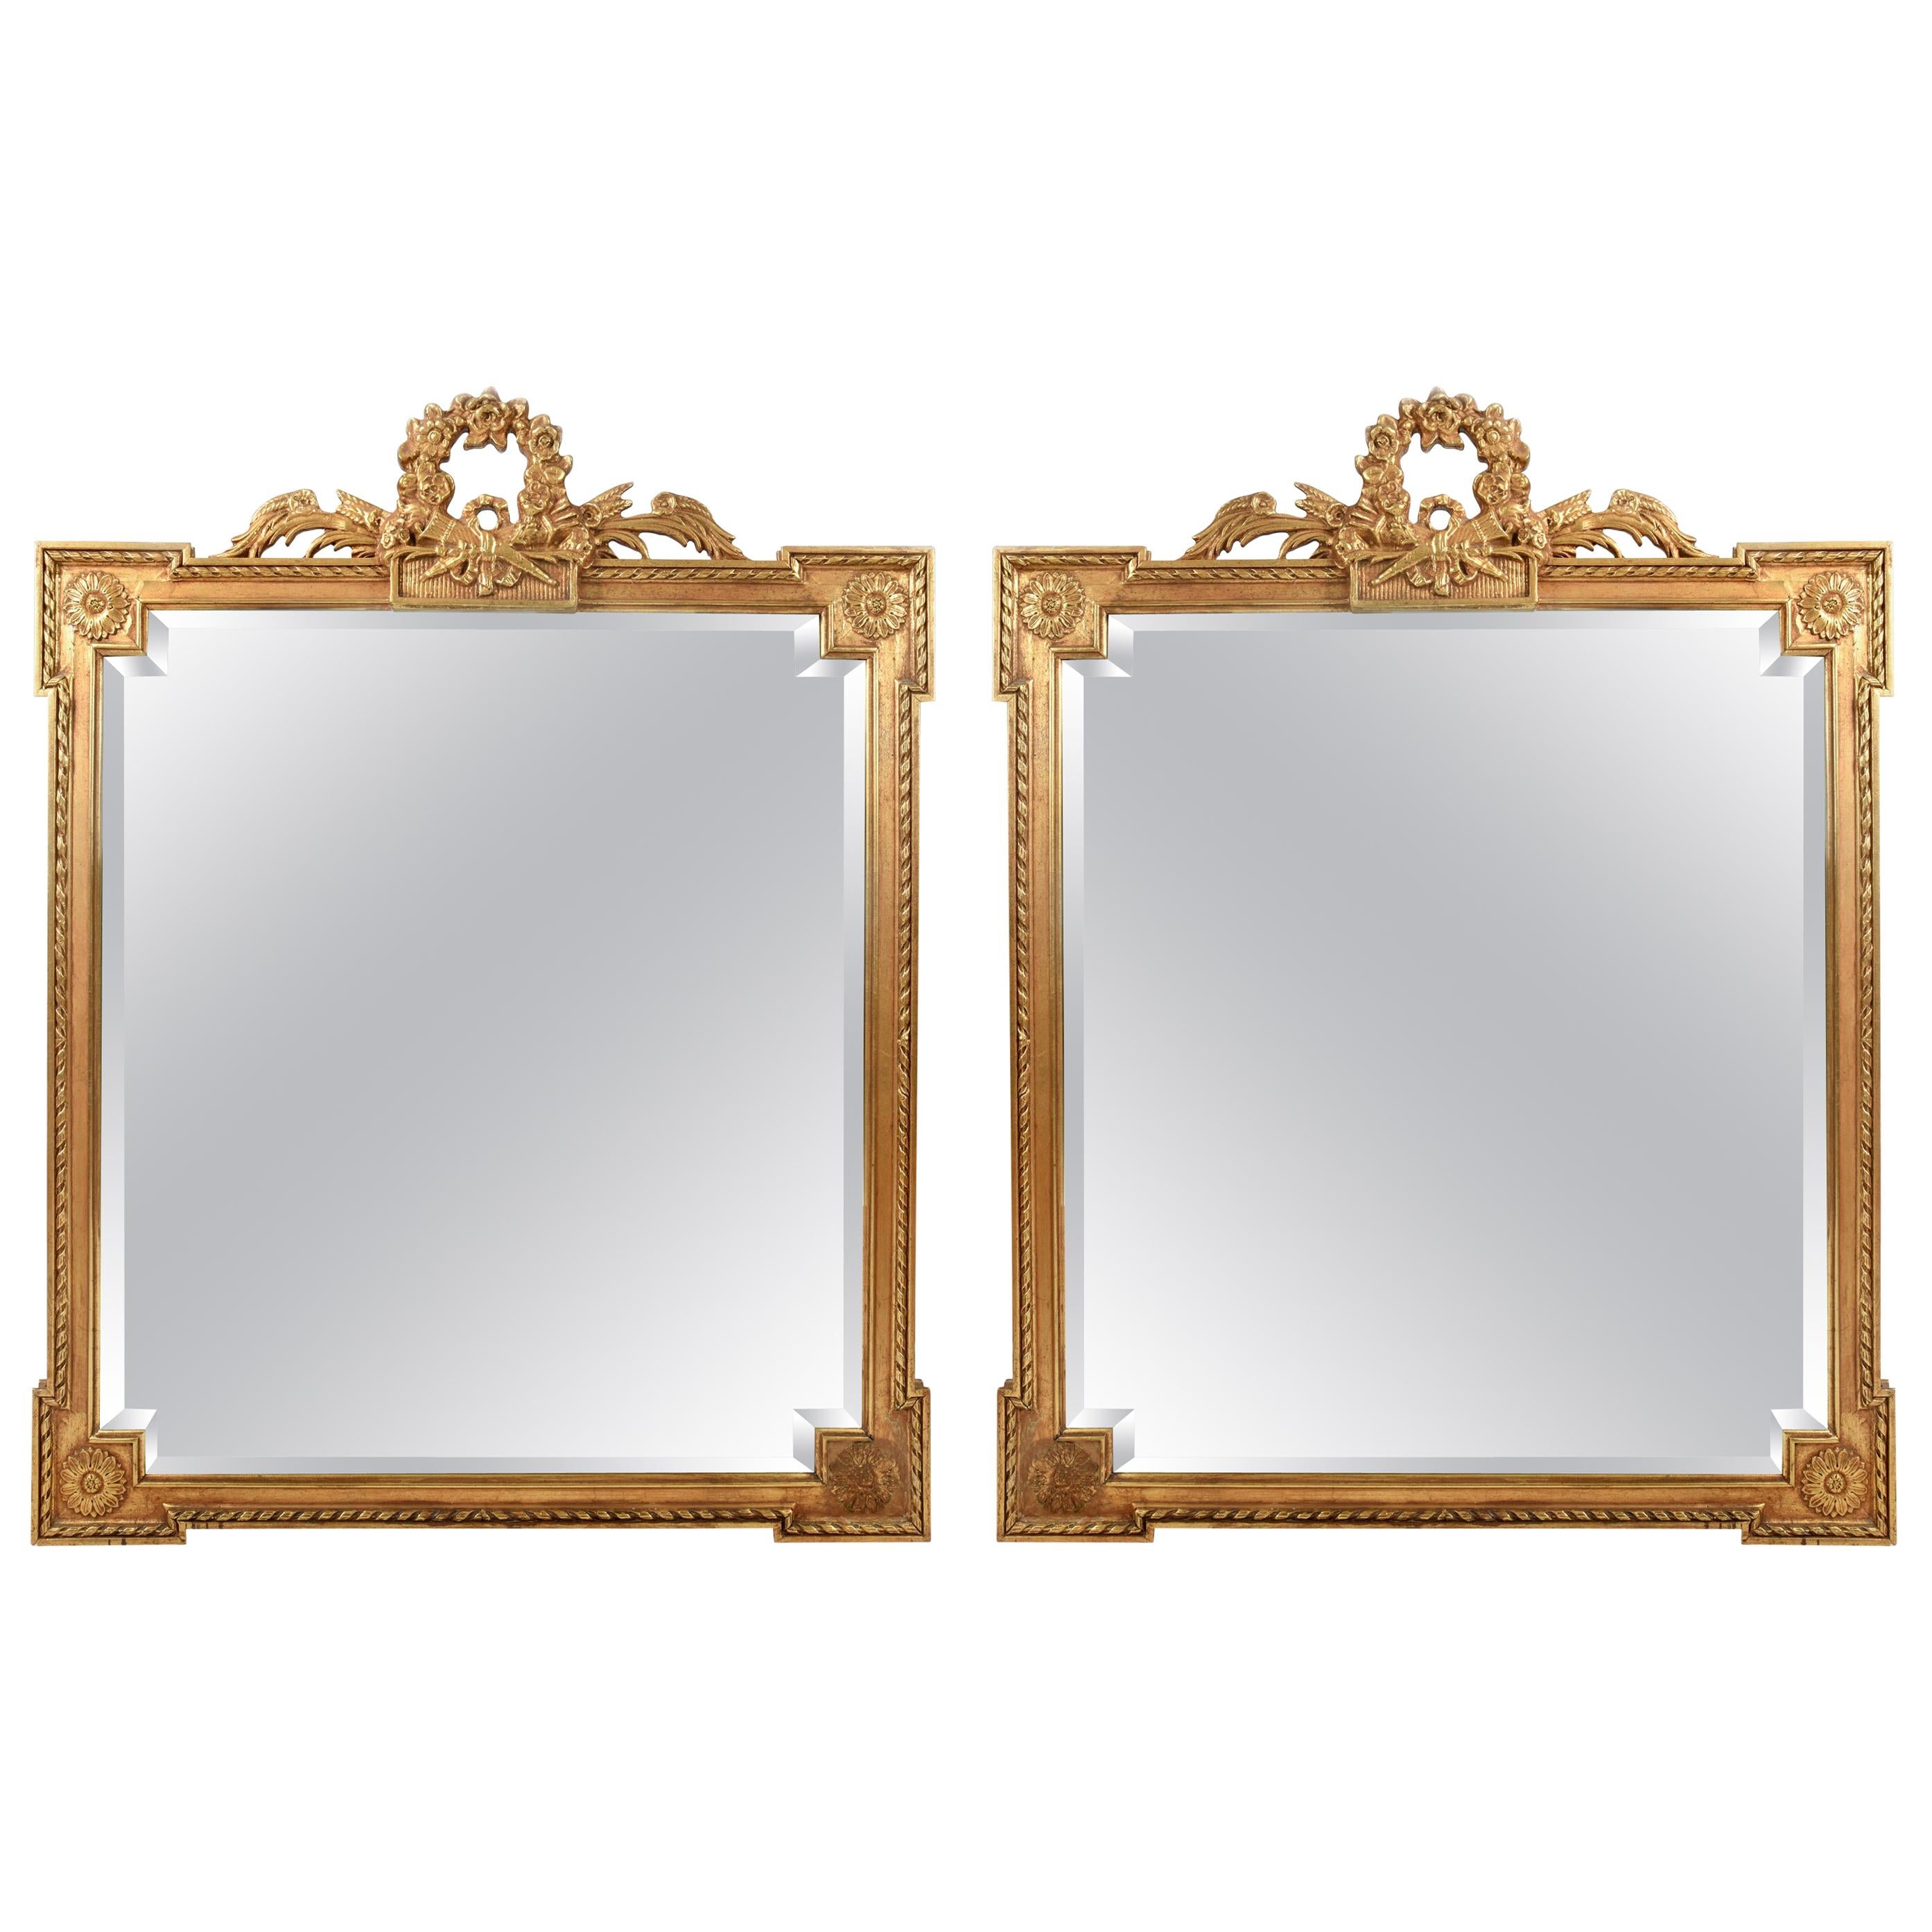 Early 20th Century Matching Pair of Giltwood Hanging Beveled Mirrors